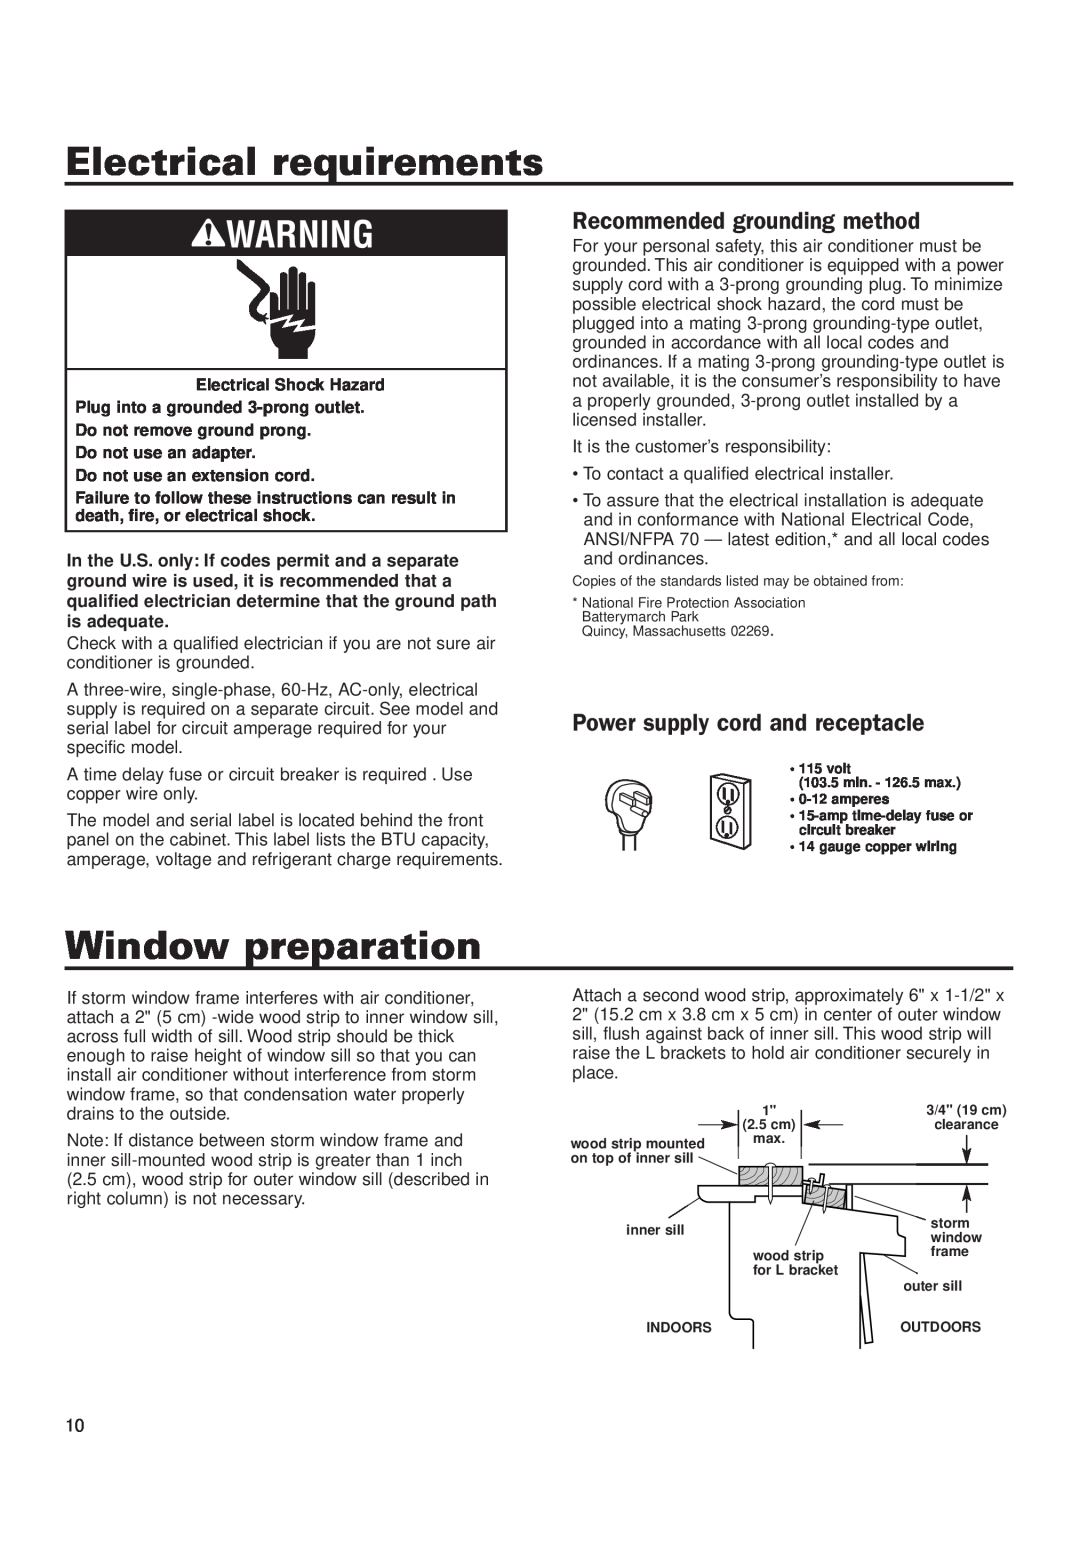 Whirlpool RA51K0 installation instructions Electrical requirements, Window preparation, Recommended grounding method 